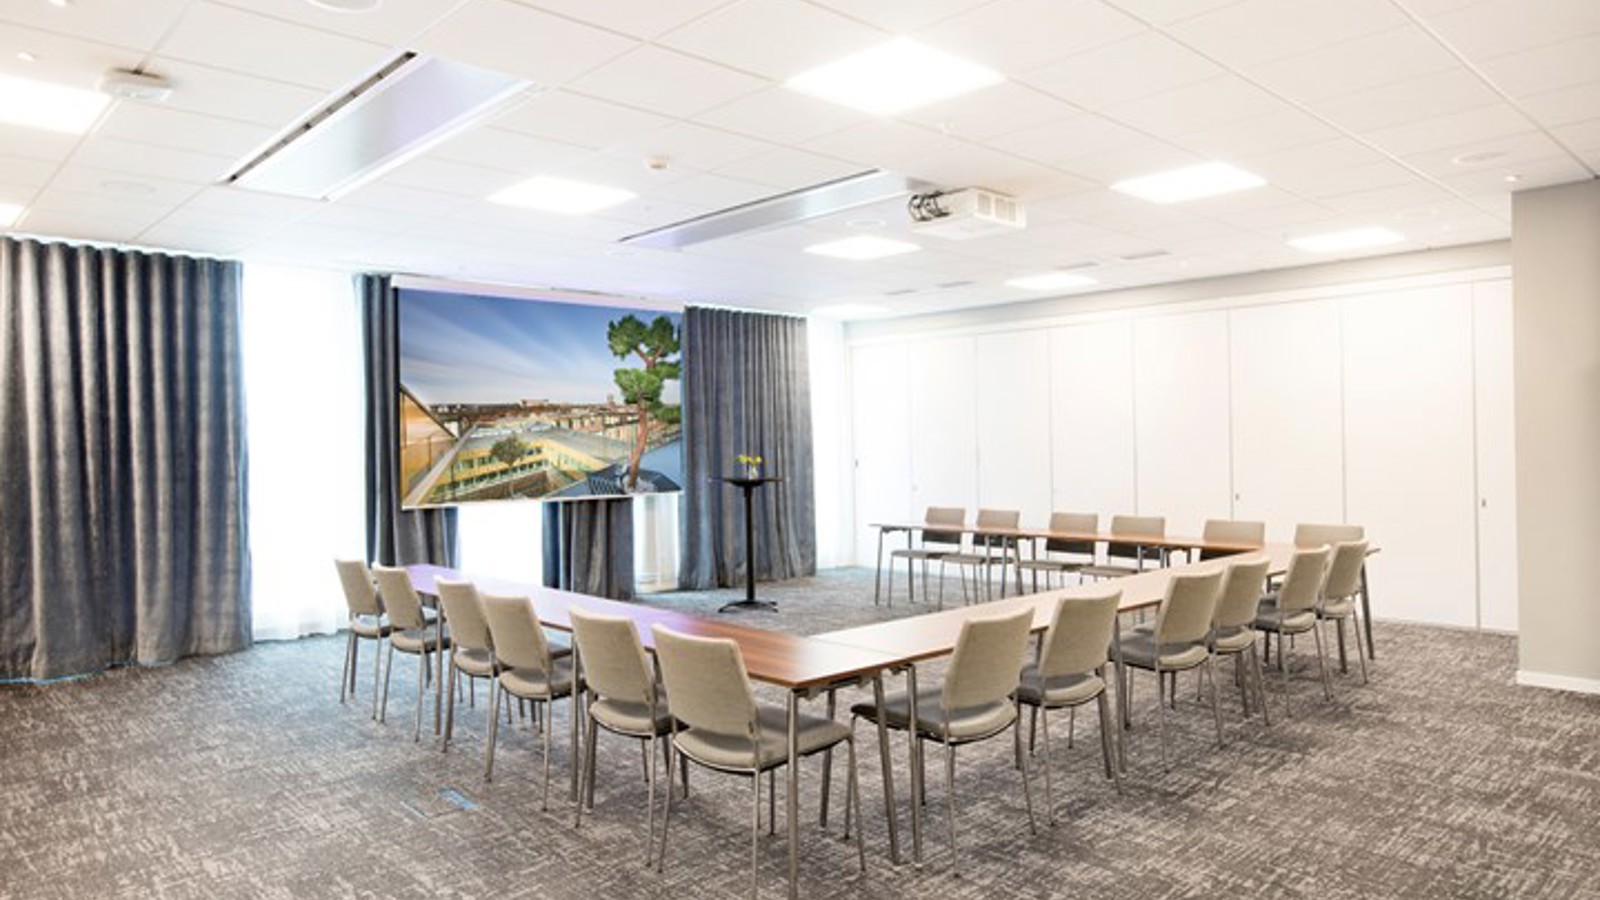 Conference room with U-shaped seating, gray floor, gray chairs and lit lights in the ceiling